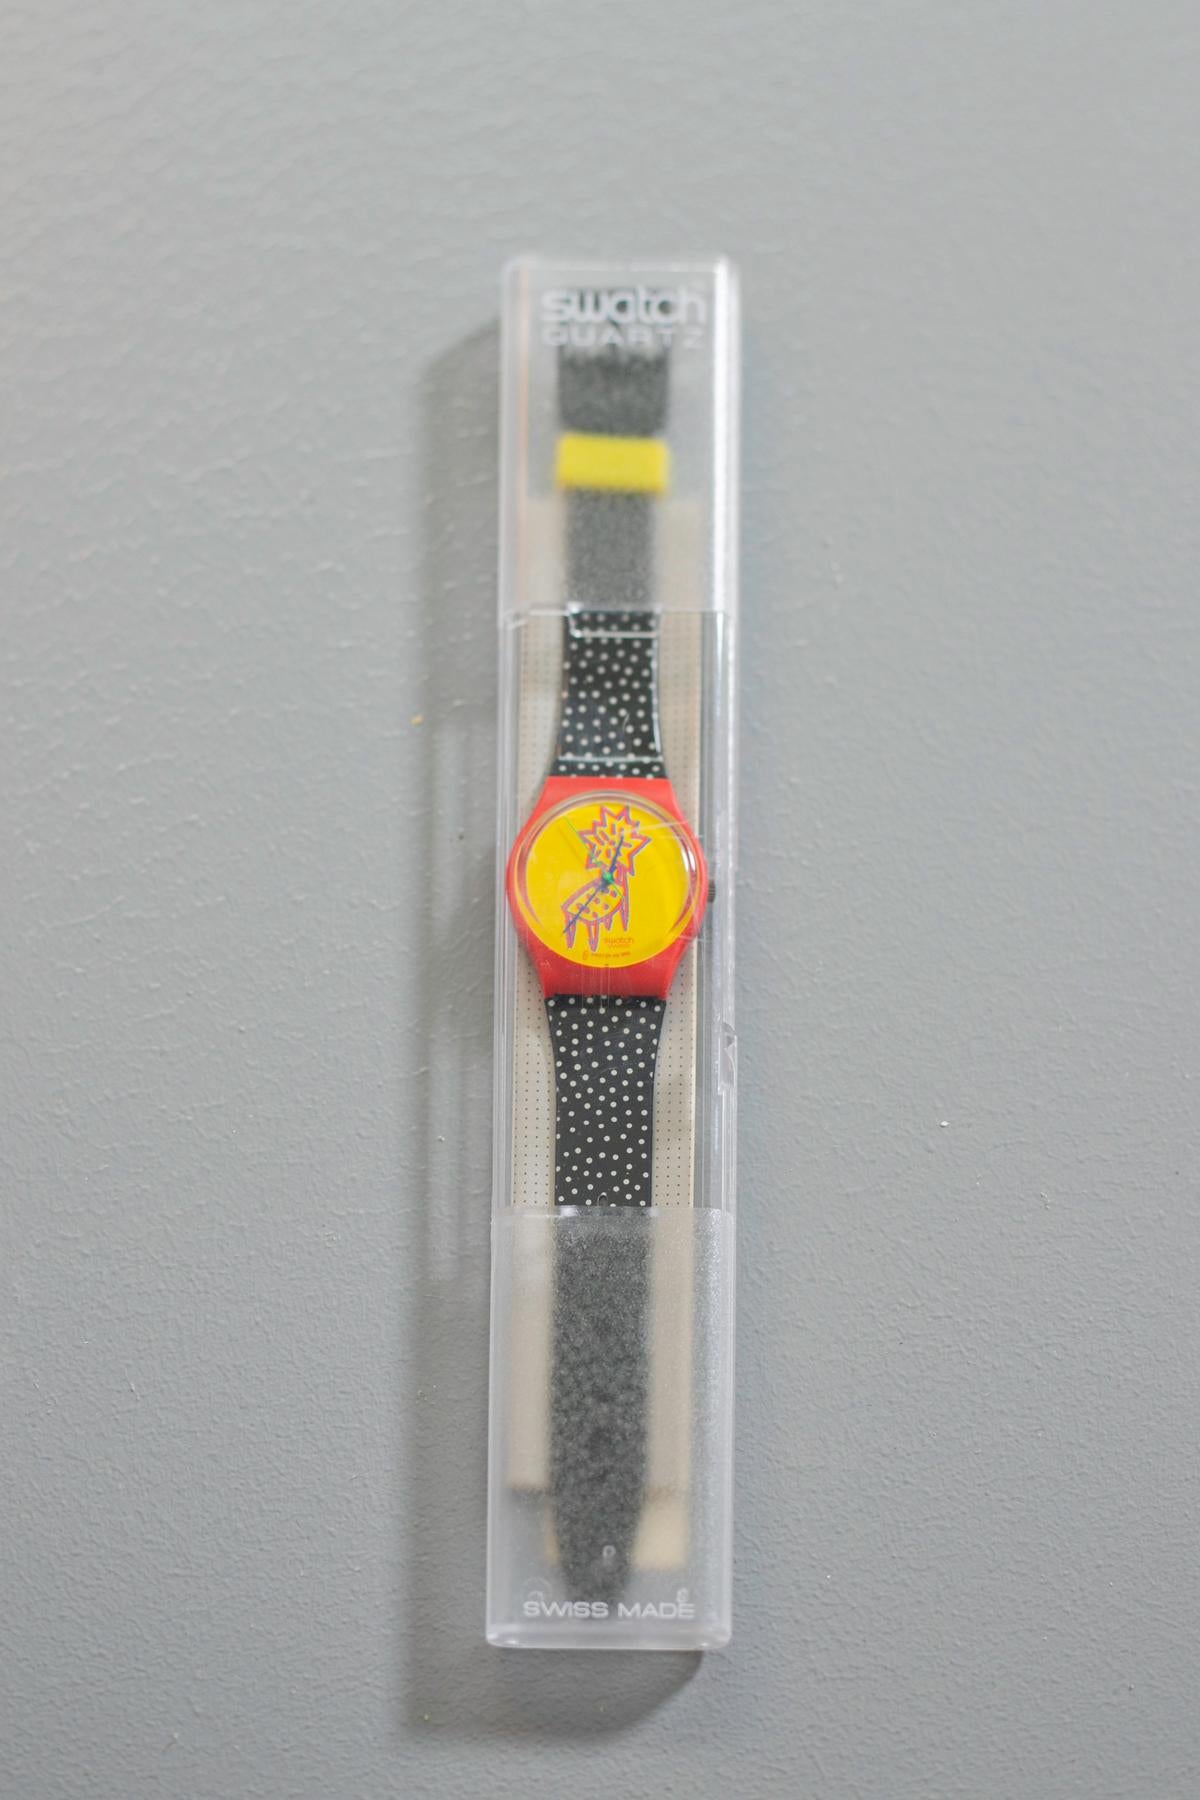 Beautiful vintage Swatch from the 1993 collection designed by Jennifer Morla. There are dots along the strap and a chair covered with dots is designed on the dial from which this extravagant and unique watch takes its name. Very versatile, this